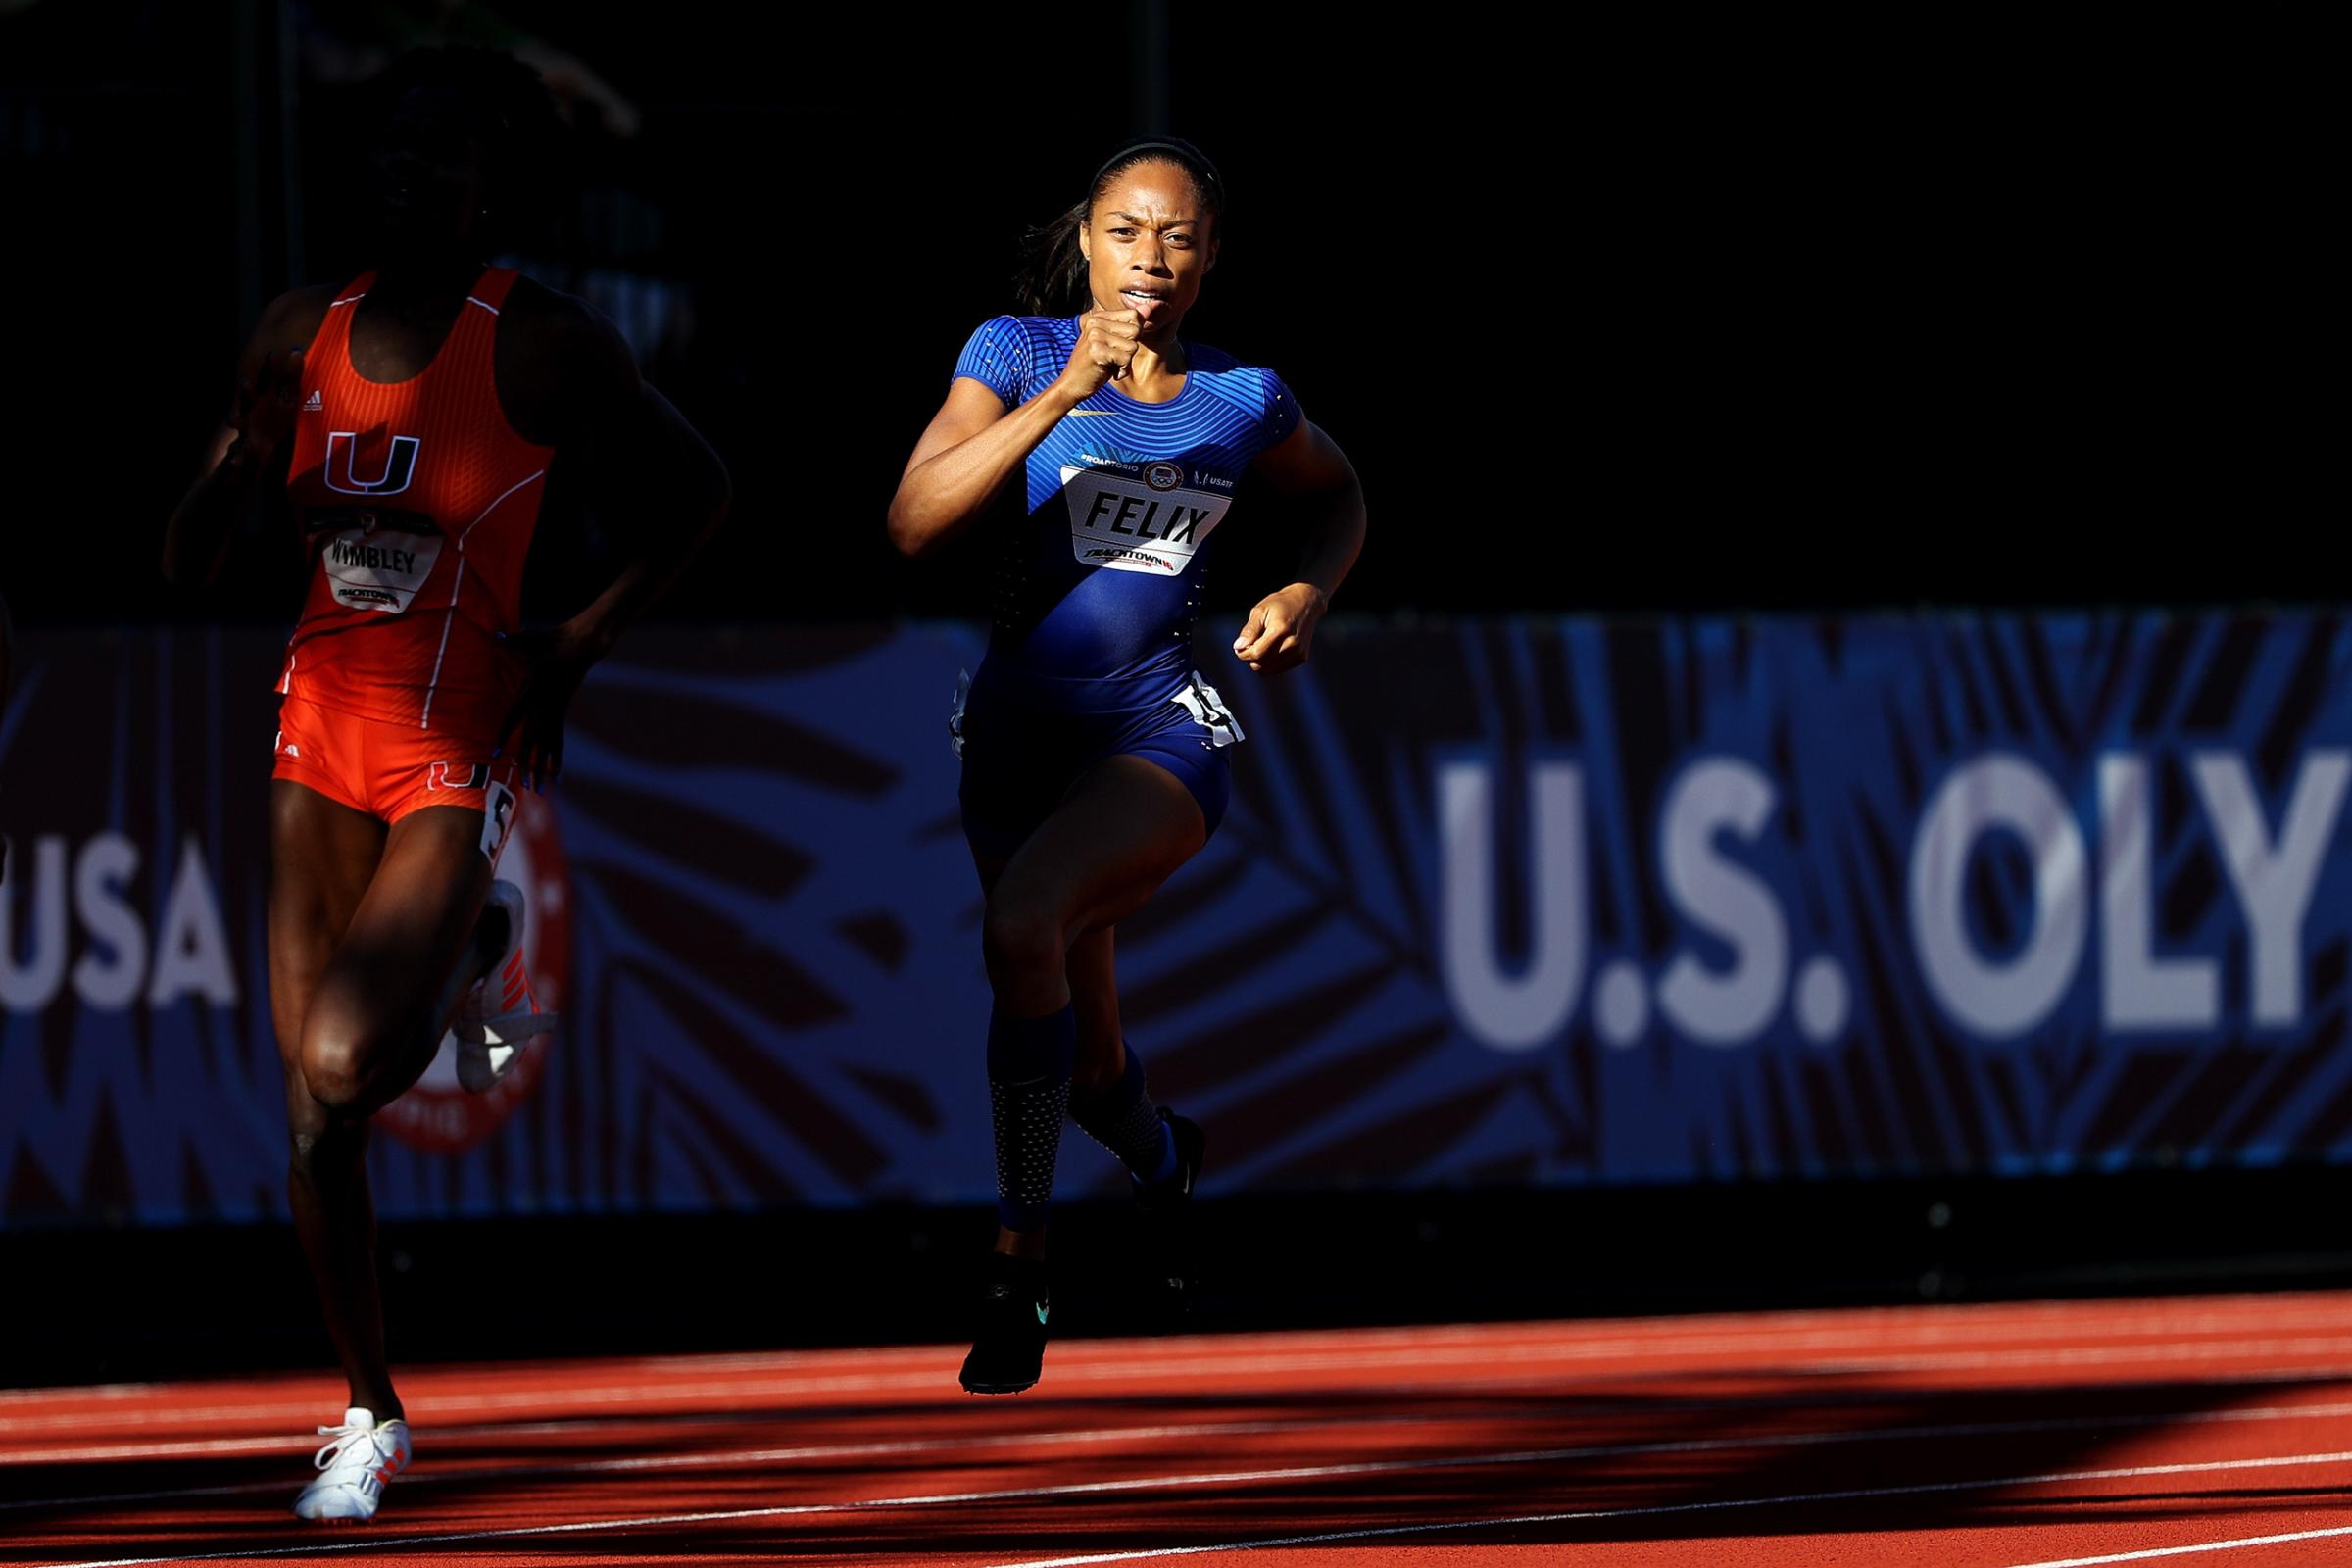 Allyson Felix—In 2004, when Felix was 18 and prepping for her first Olympics, she trained with a teammate who was pushing 30. She swore that would never be her. “And here I am in the same position, probably looking so old to those kids who are training with us,” says Felix. “But I completely get it now. If you love it, why not?” Felix announced herself as one of the world’s great sprinting talents with a silver medal in the 200 m at those 2004 Games, then paid off that promise with another silver and four golds in 2008 and 2012—tying Jackie Joyner-Kersee for the U.S. women’s track medals record. Felix won’t get the chance to win gold in both the 200 m and 400 m in Rio; she missed a 200 spot by 0.01 sec. at the U.S. trials. But a win in either the 400 m or a relay would give Felix the gold-medal record and cement her place in track history. —S.G.